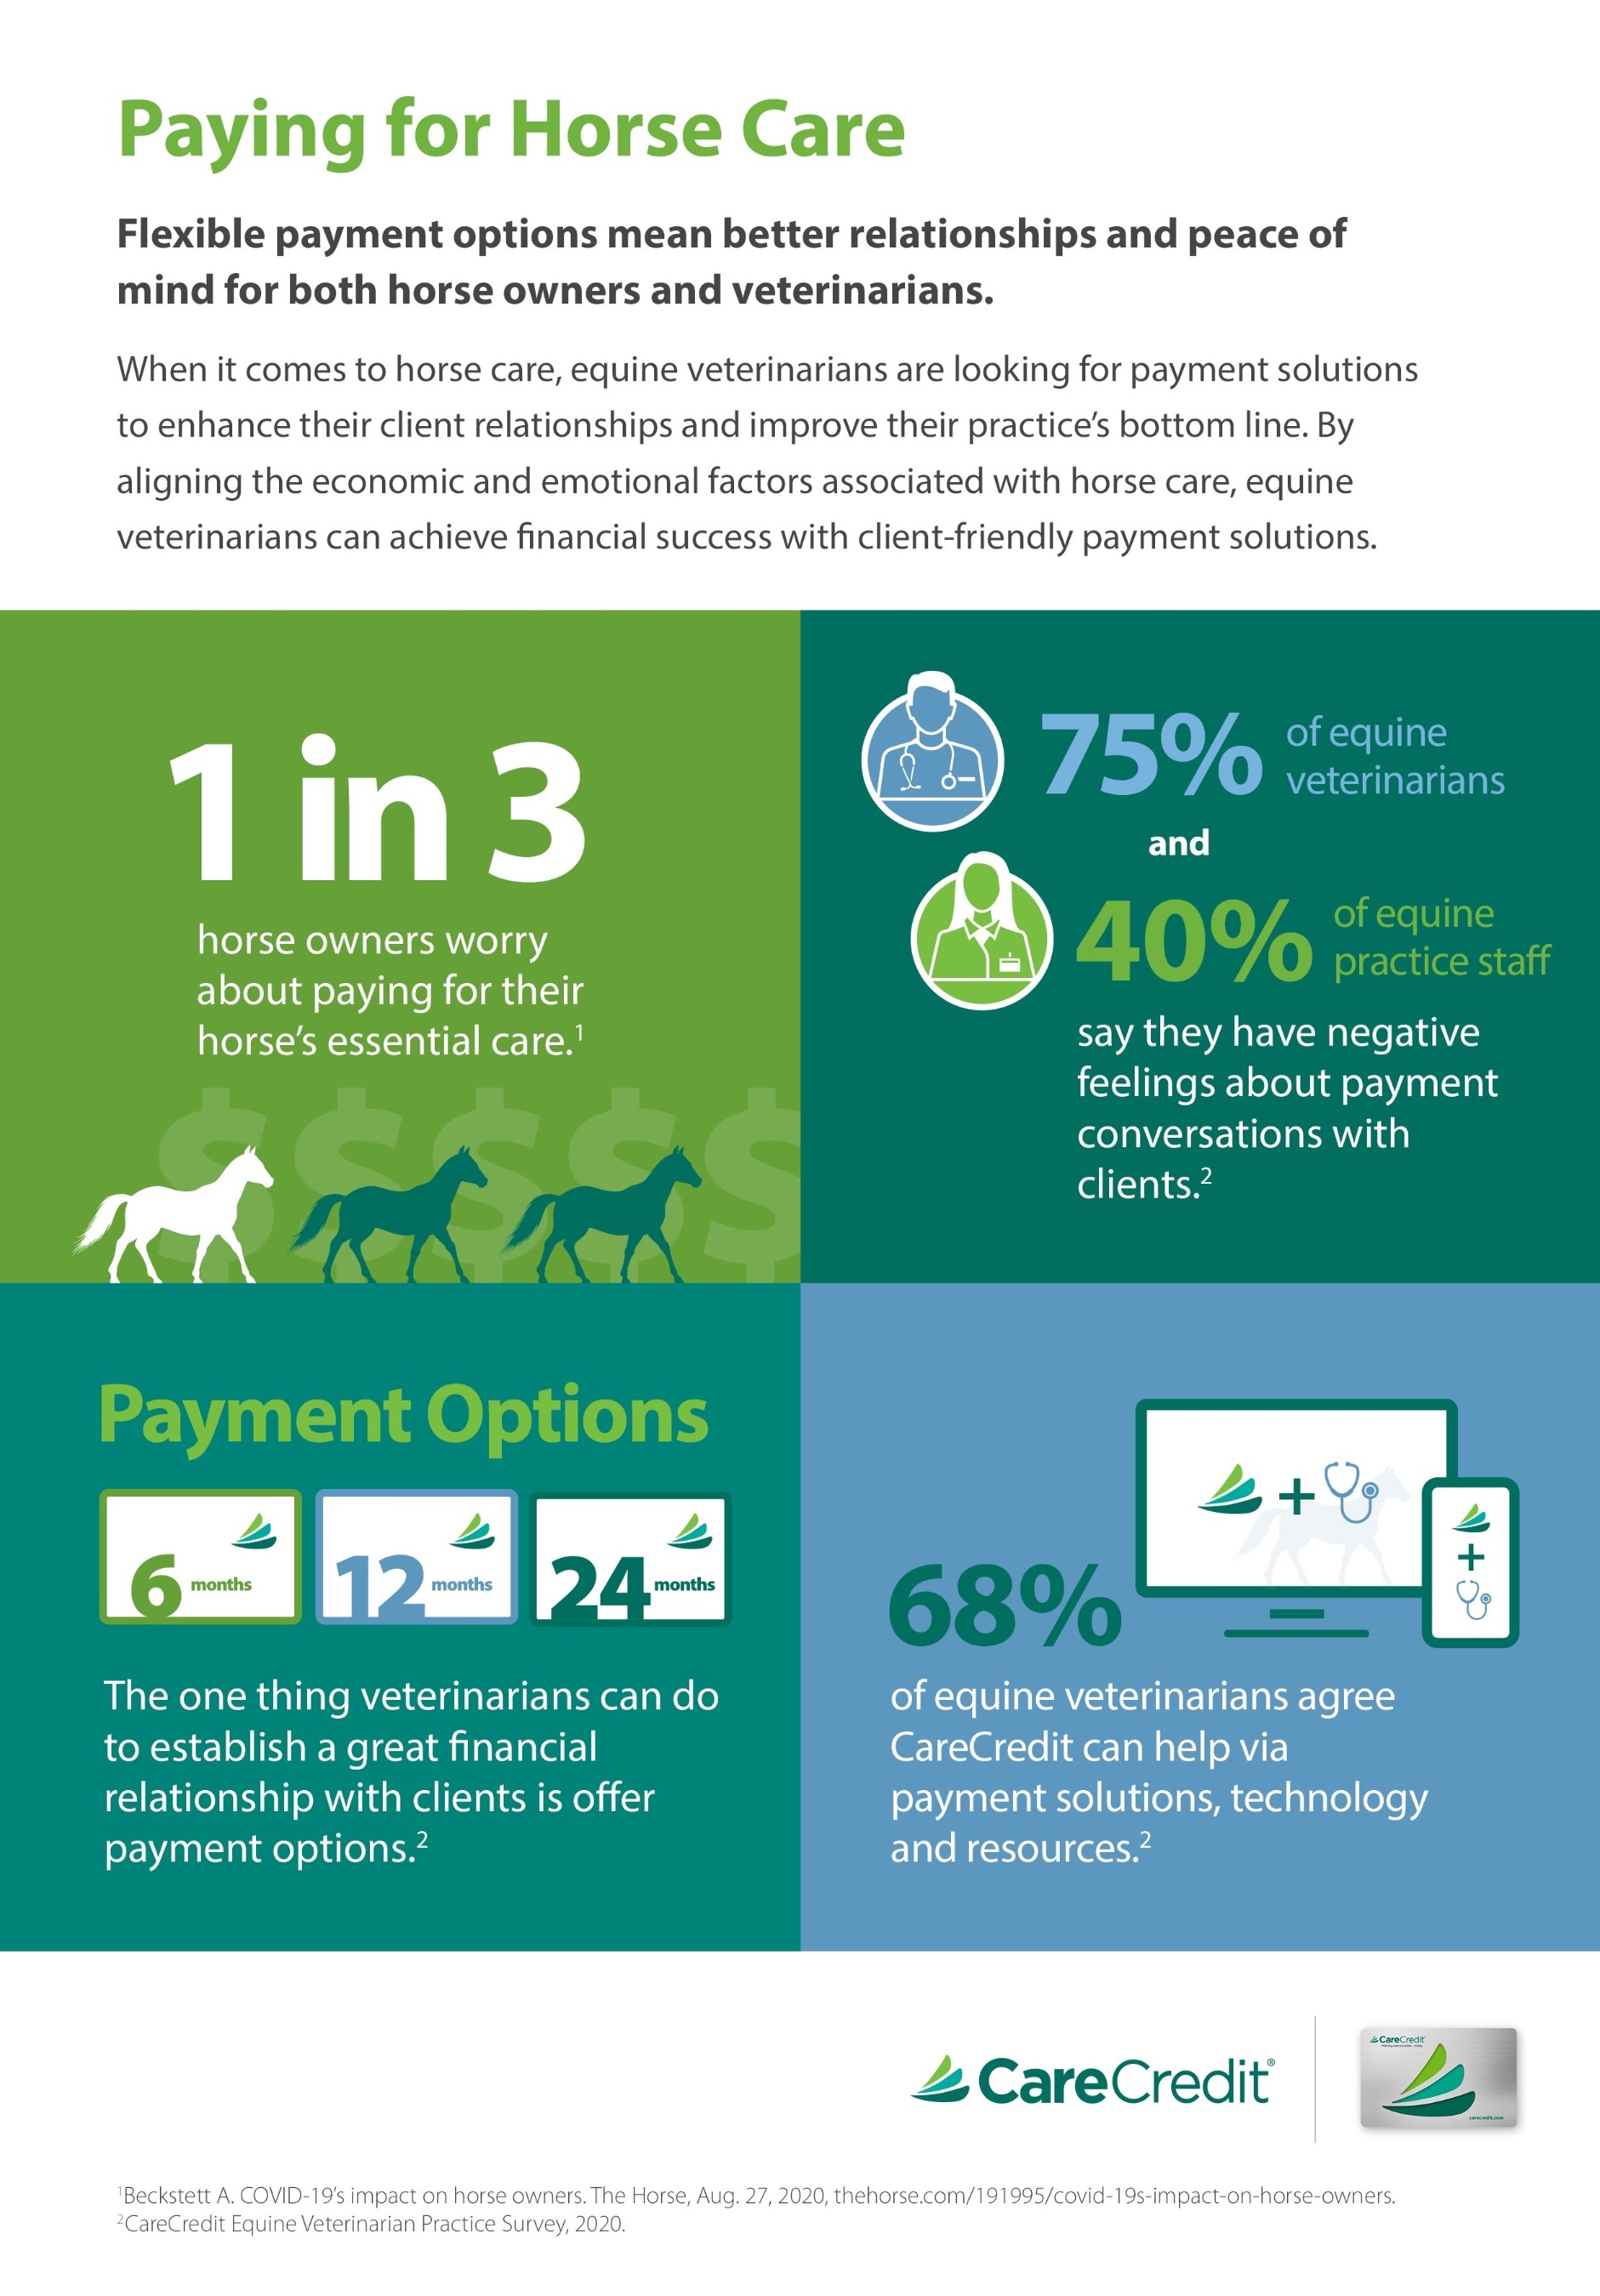 Synchrony financial solution, CareCredit, gives horse owners a new way to pay for care and provides equine veterinarians the ability to collect payment for services any time and from any location.